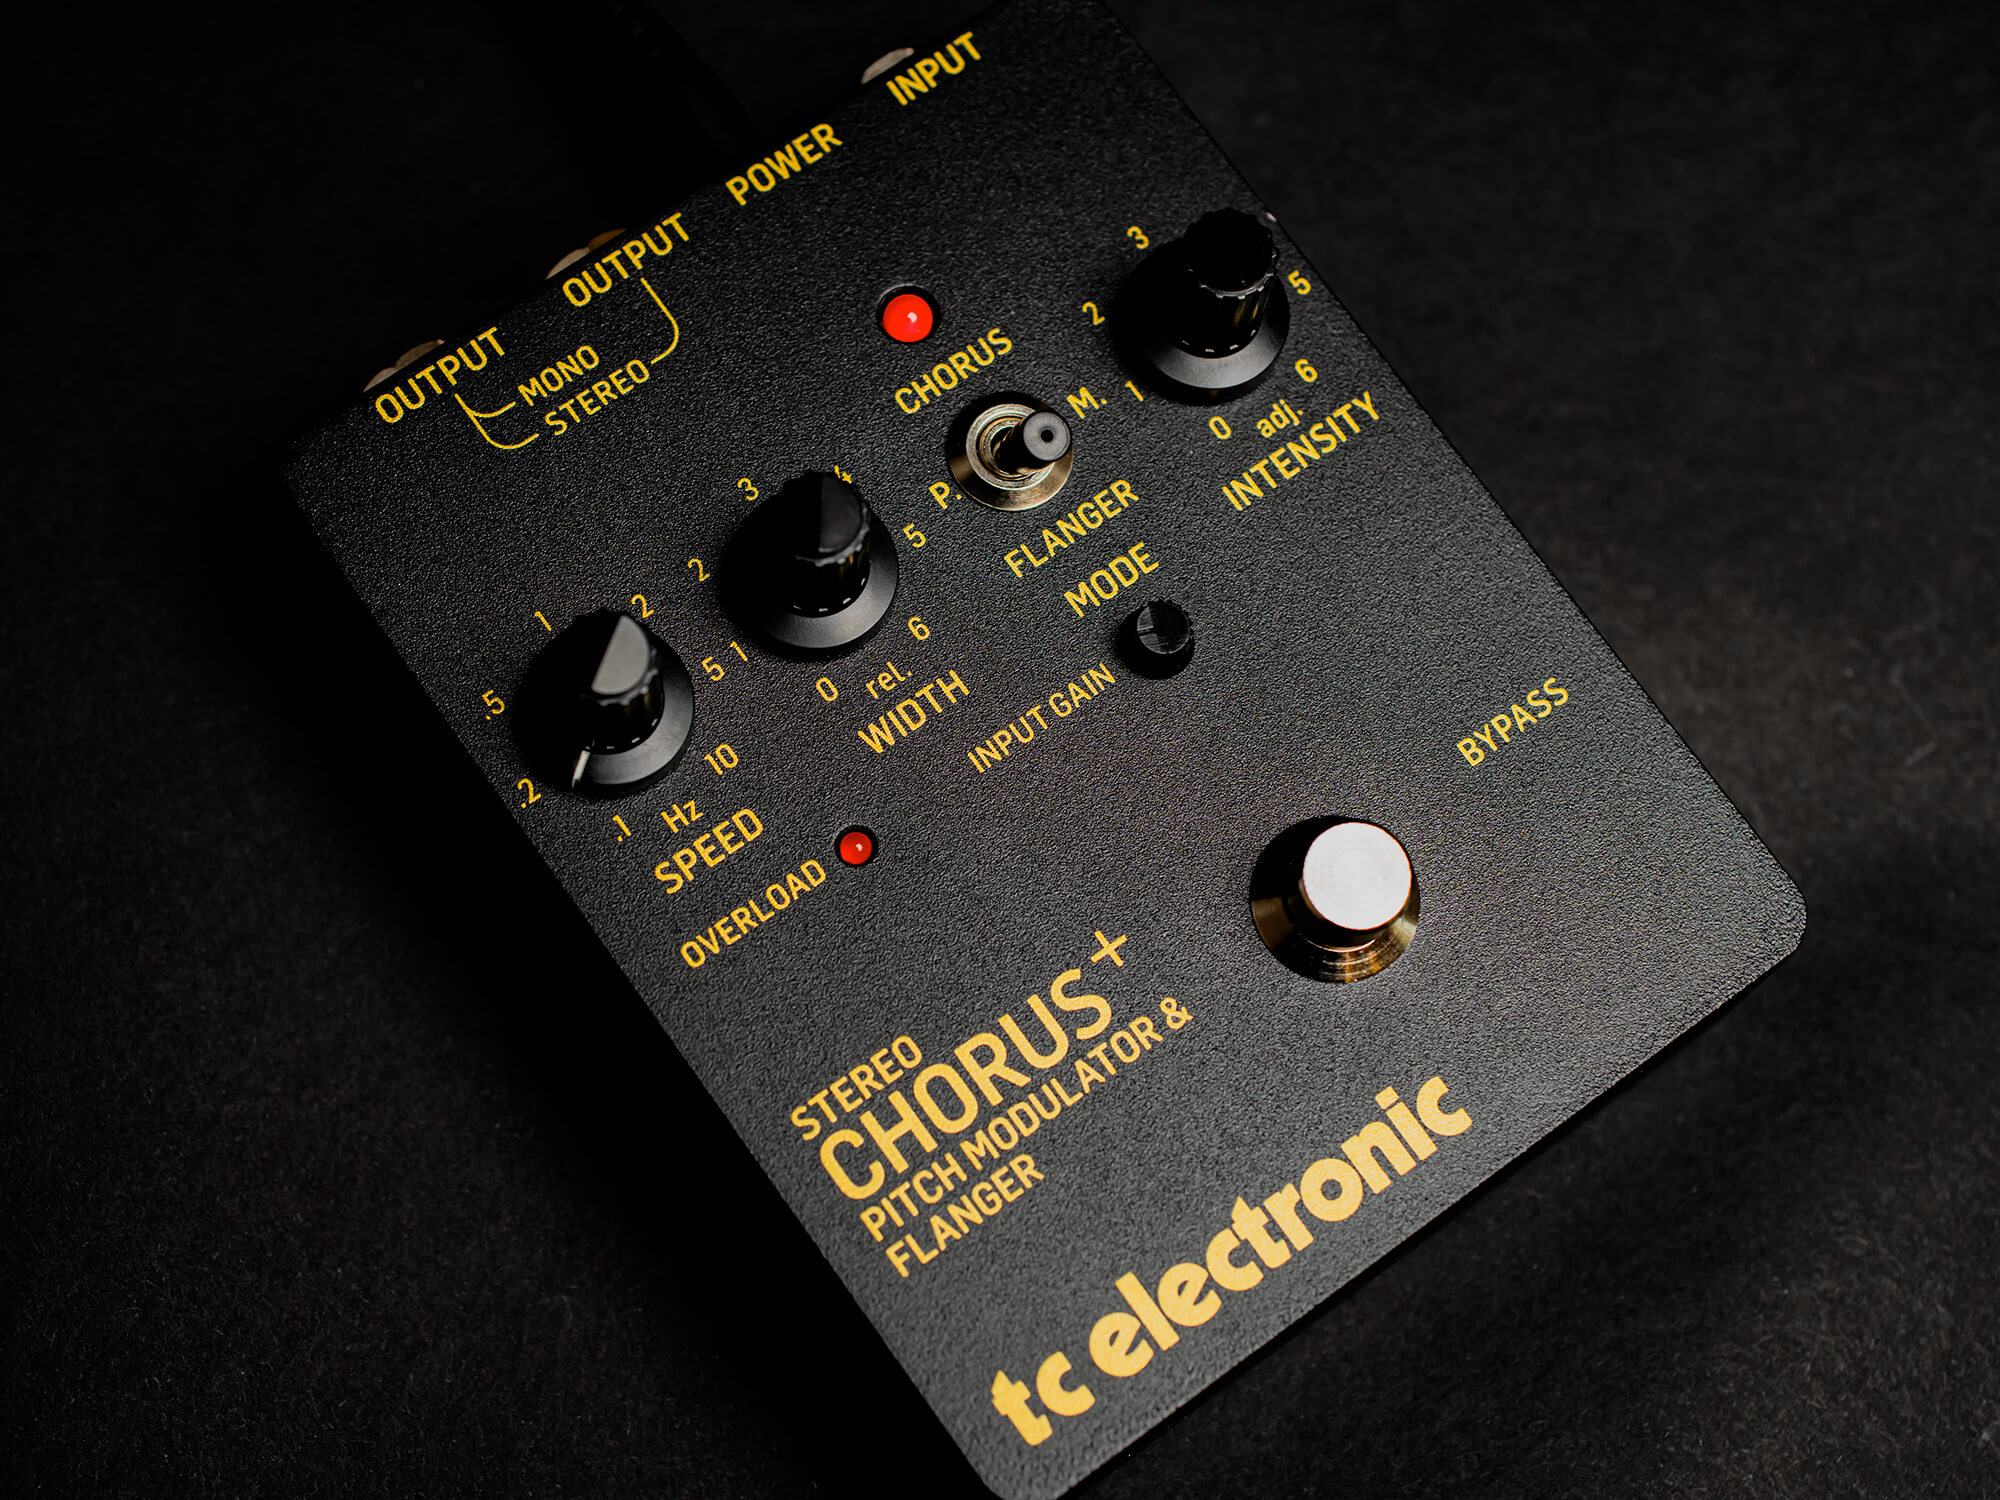 Stap storm Dierentuin s nachts TC Electronic reissues its first pedal, the Stereo Chorus Flanger |  Guitar.com | All Things Guitar